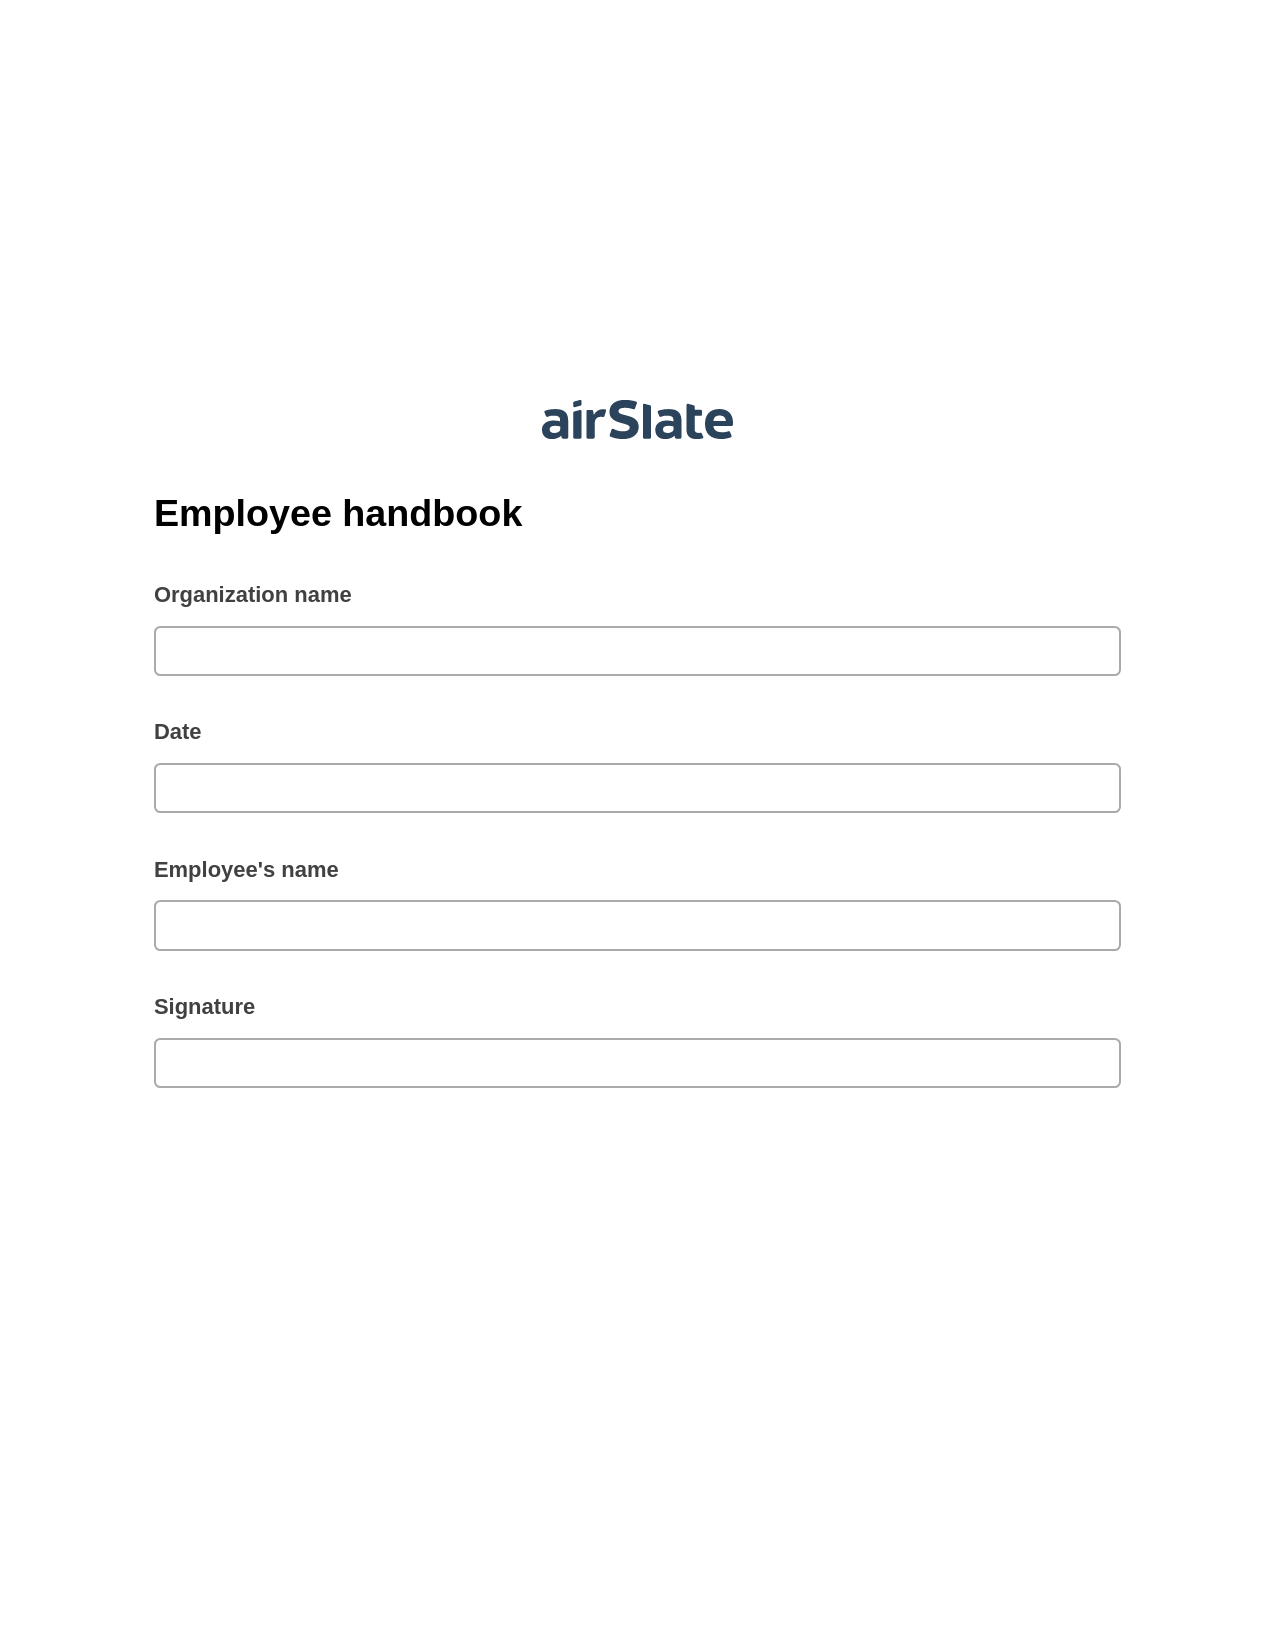 Employee handbook Pre-fill from Excel Spreadsheet Bot, Text Message Notification Bot, Archive to SharePoint Folder Bot